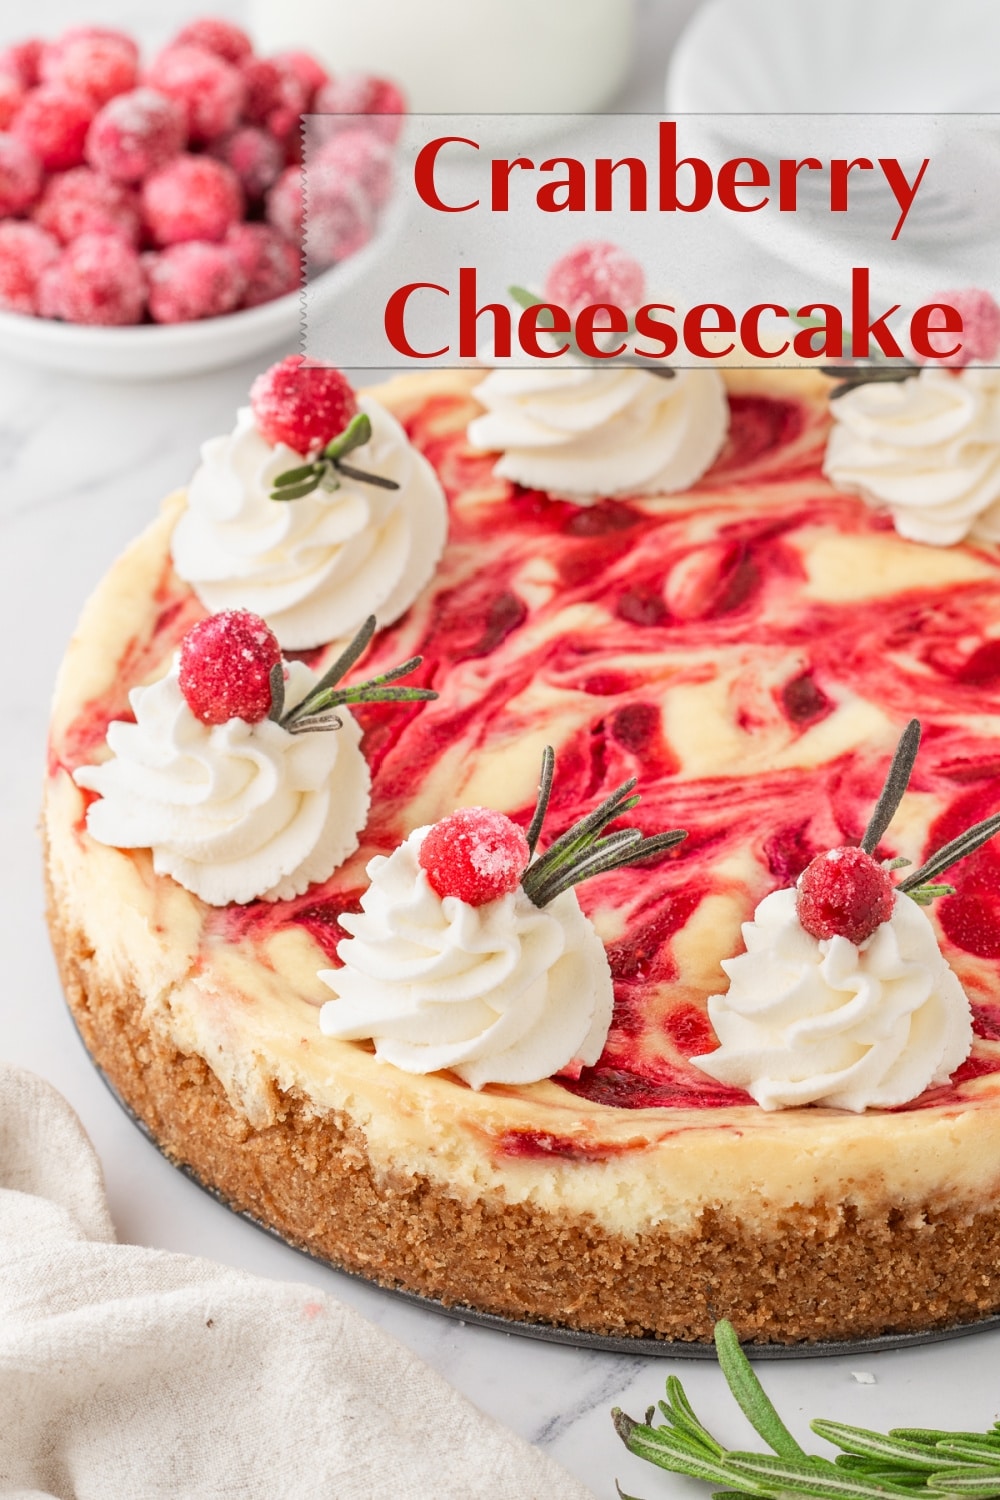 A slice of this creamy Cranberry Cheesecake is worth rushing through dinner so you can get straight to dessert. While a classic New York-style cheesecake is a formidable contender, this vibrant, fresh cranberry twist is a tasty stunner.  via @cmpollak1